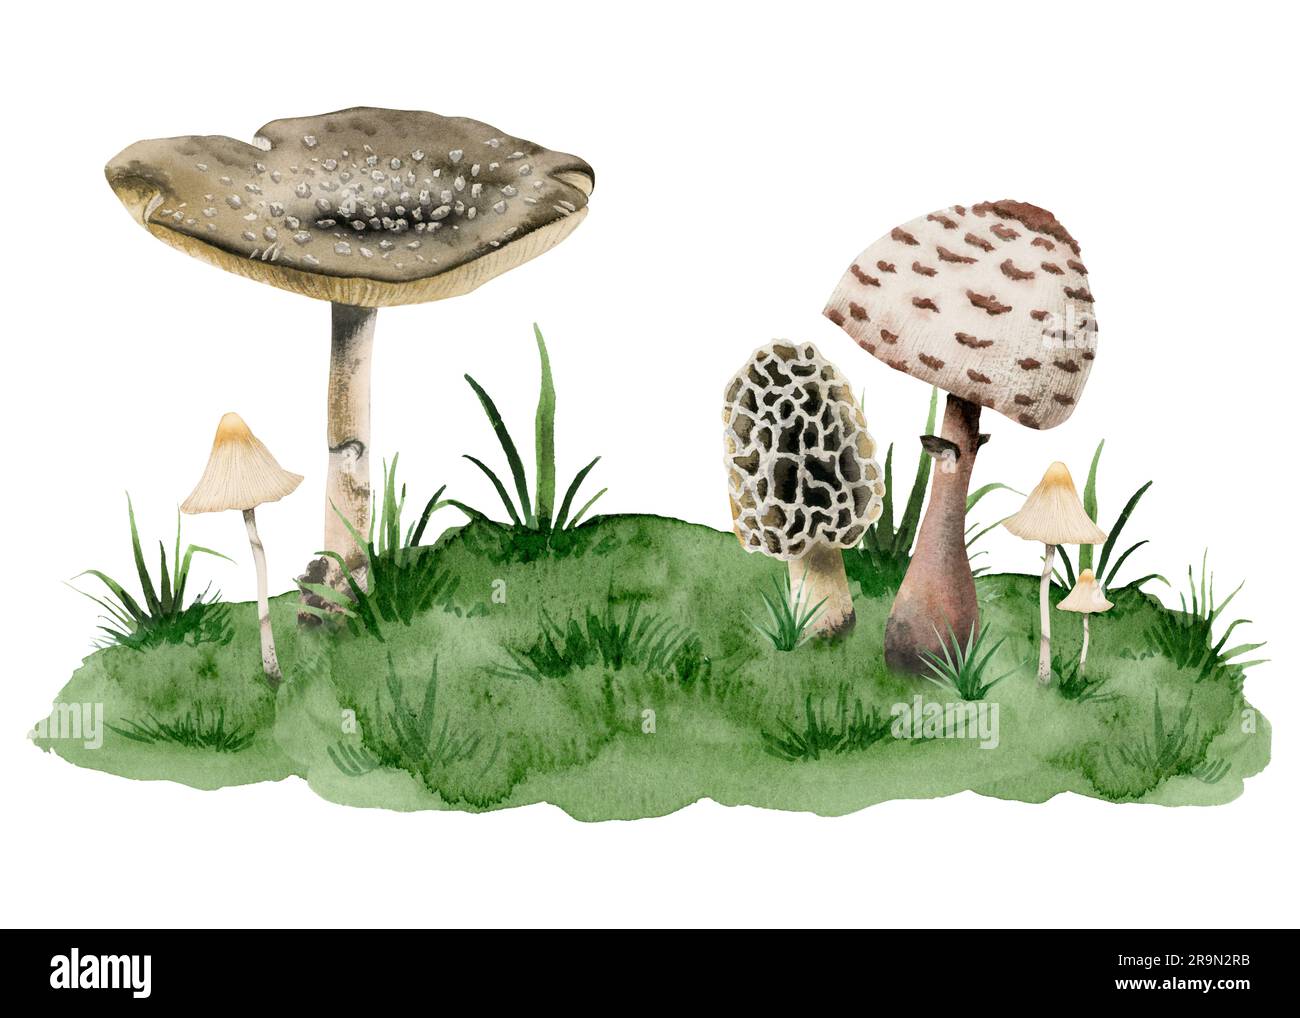 Amanita panther cap poisonous mushrooms, toadstool and fungus growing on green hill with grass watercolor illustration Stock Photo